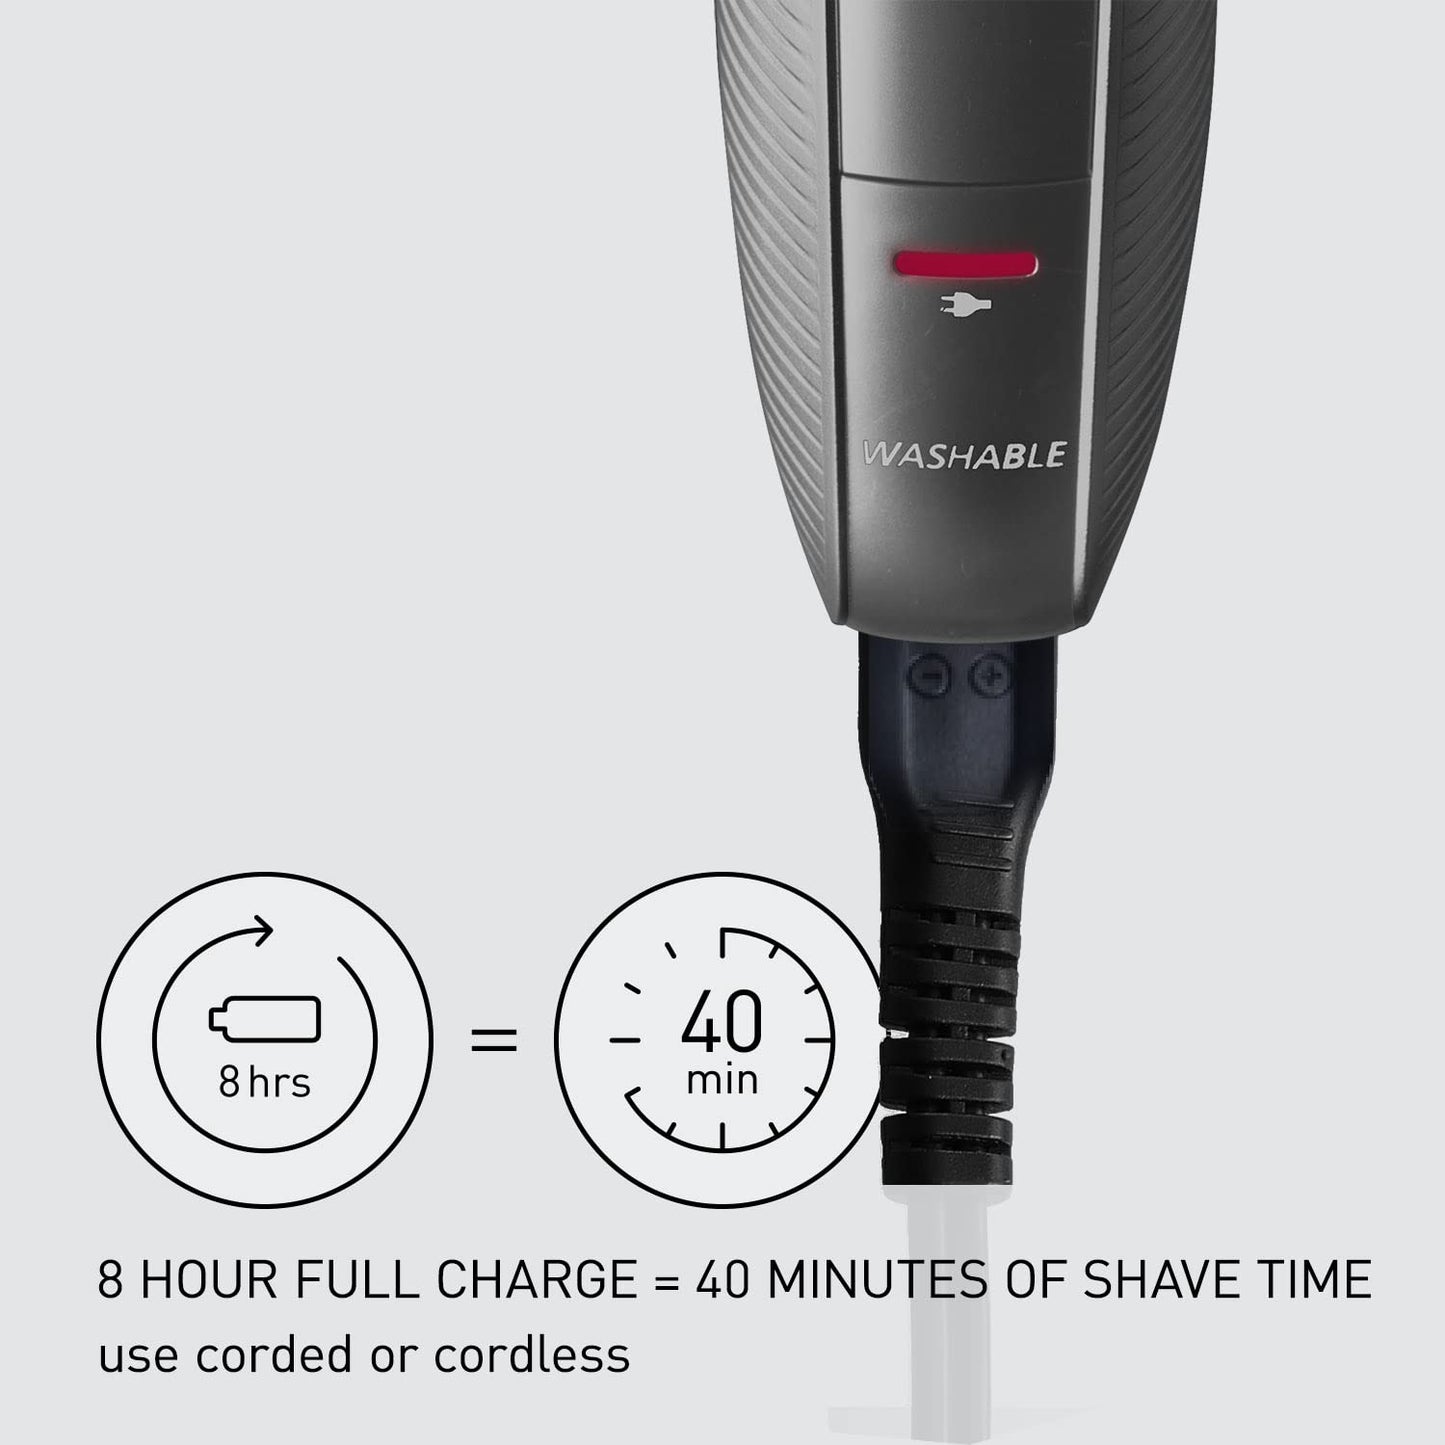 Panasonic Performance Hair Clippers with 2 Attachments and Adjustable Length Settings, Corded or Cordless Trimmer for Hair and Beard - ER-GC63-H (Silver)